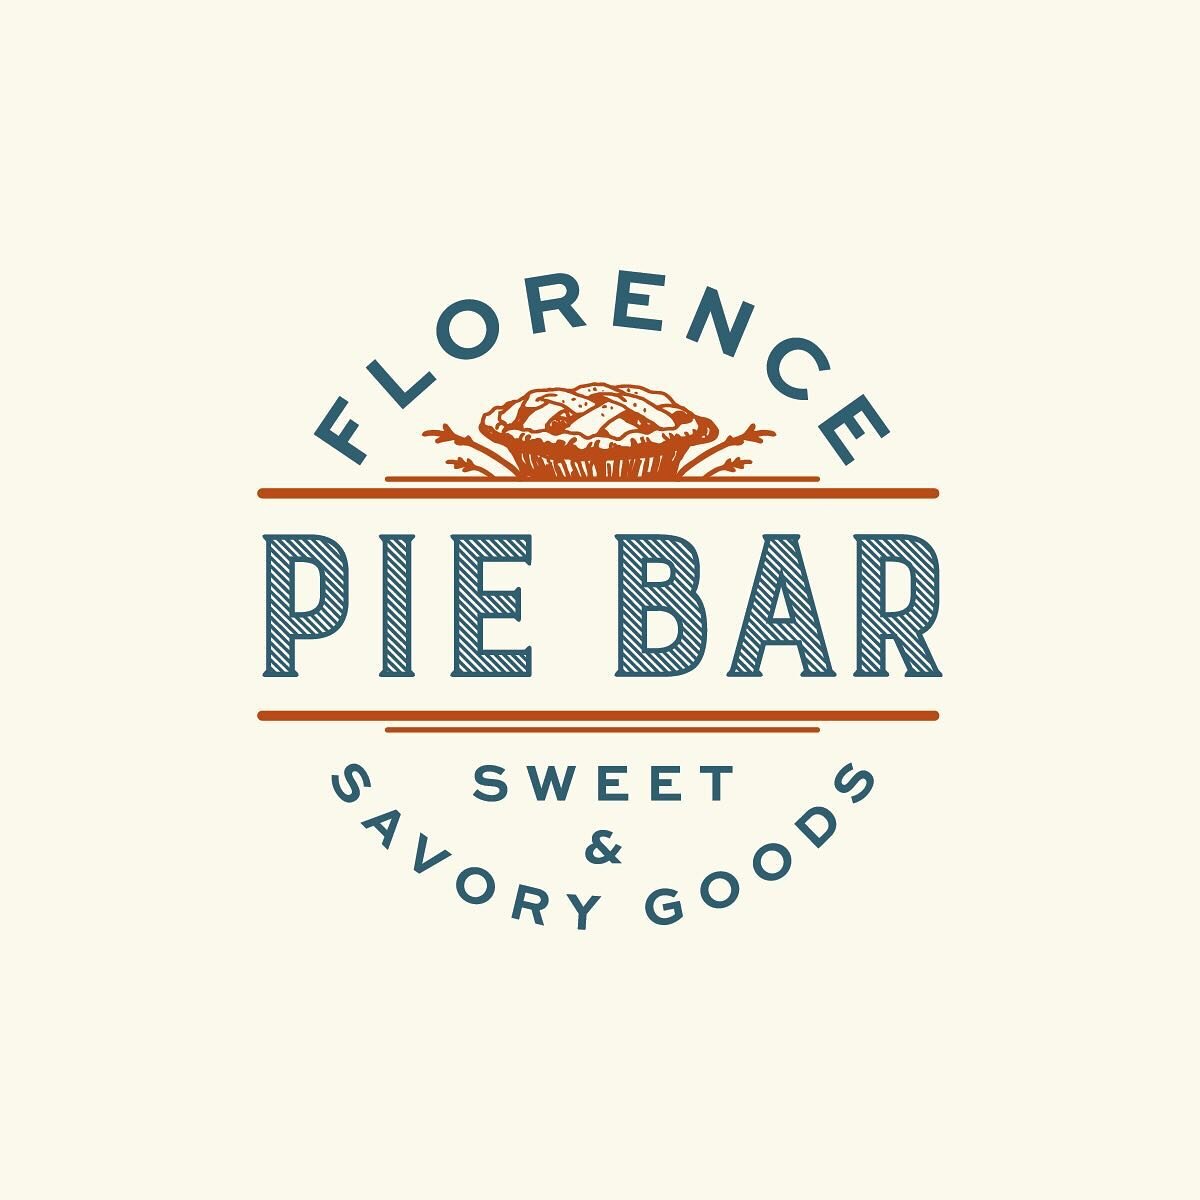 Fresh out of the oven: new work for @florencepiebar 🥧 Florence Pie Bar is nothing less than a local icon, and we were thrilled when we heard the legacy of this special bakery was in good hands with our friends over at @familiarscoffee 🖤 the announc